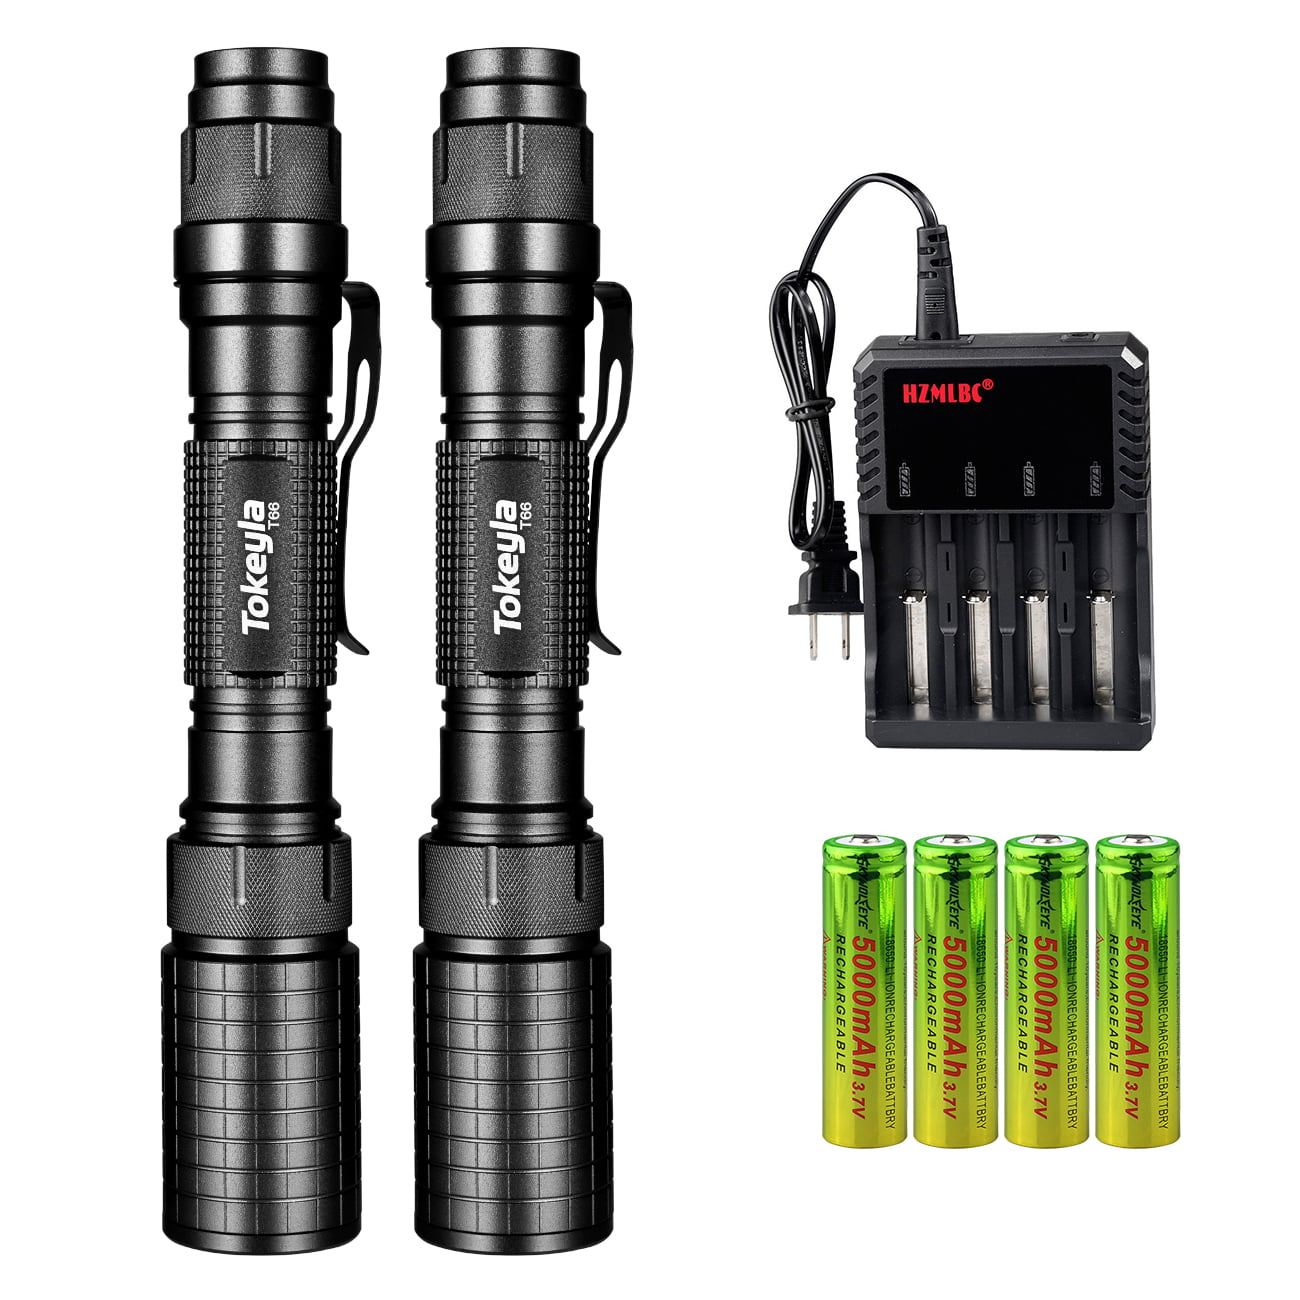 Zoomable 5 Light Modes for Camping Hiking Running LED Tactical Flashlight,and 6PCS 3.7V 18650 Battery with USB Charger,IPX5 Water-Resistant 